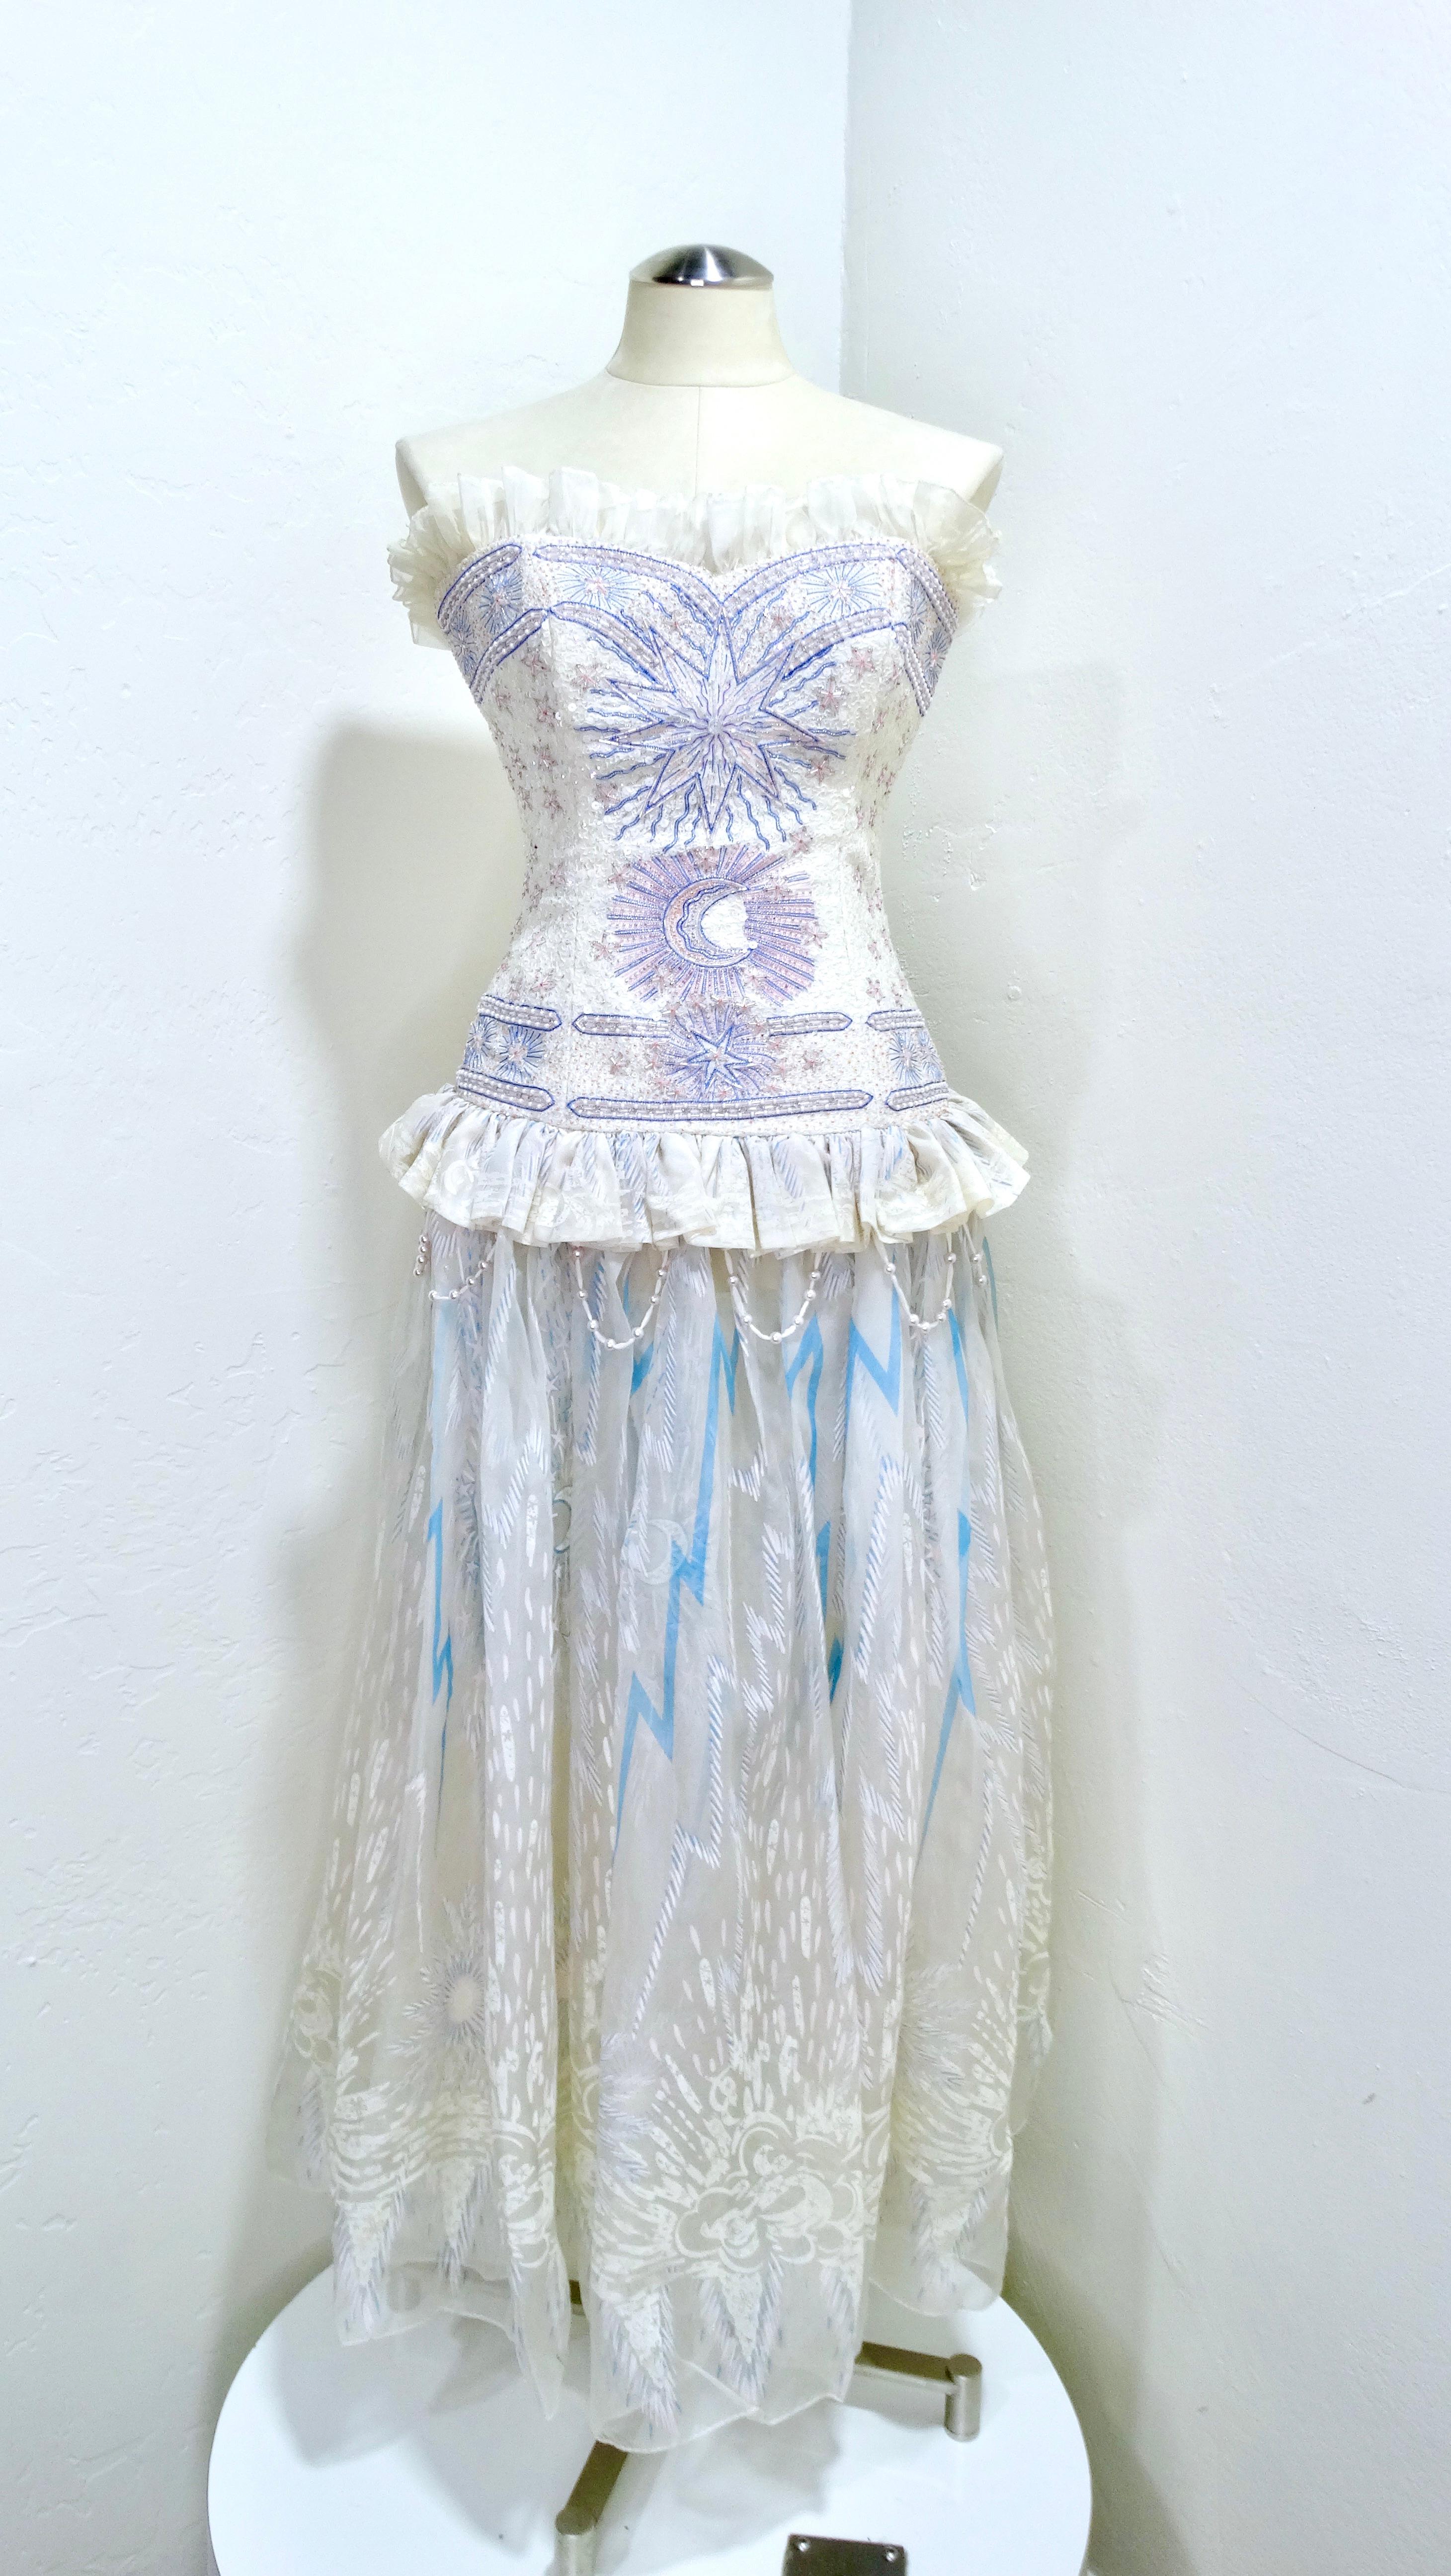 Live out all of your best princess or Zandra Rhode dreams in this custom Zandra Rhodes dress. This gown was signed by Rhodes herself in the year of 1989. Mrs. Rhodes is in the details, this exquisite piece was custom made it has intricate beading of